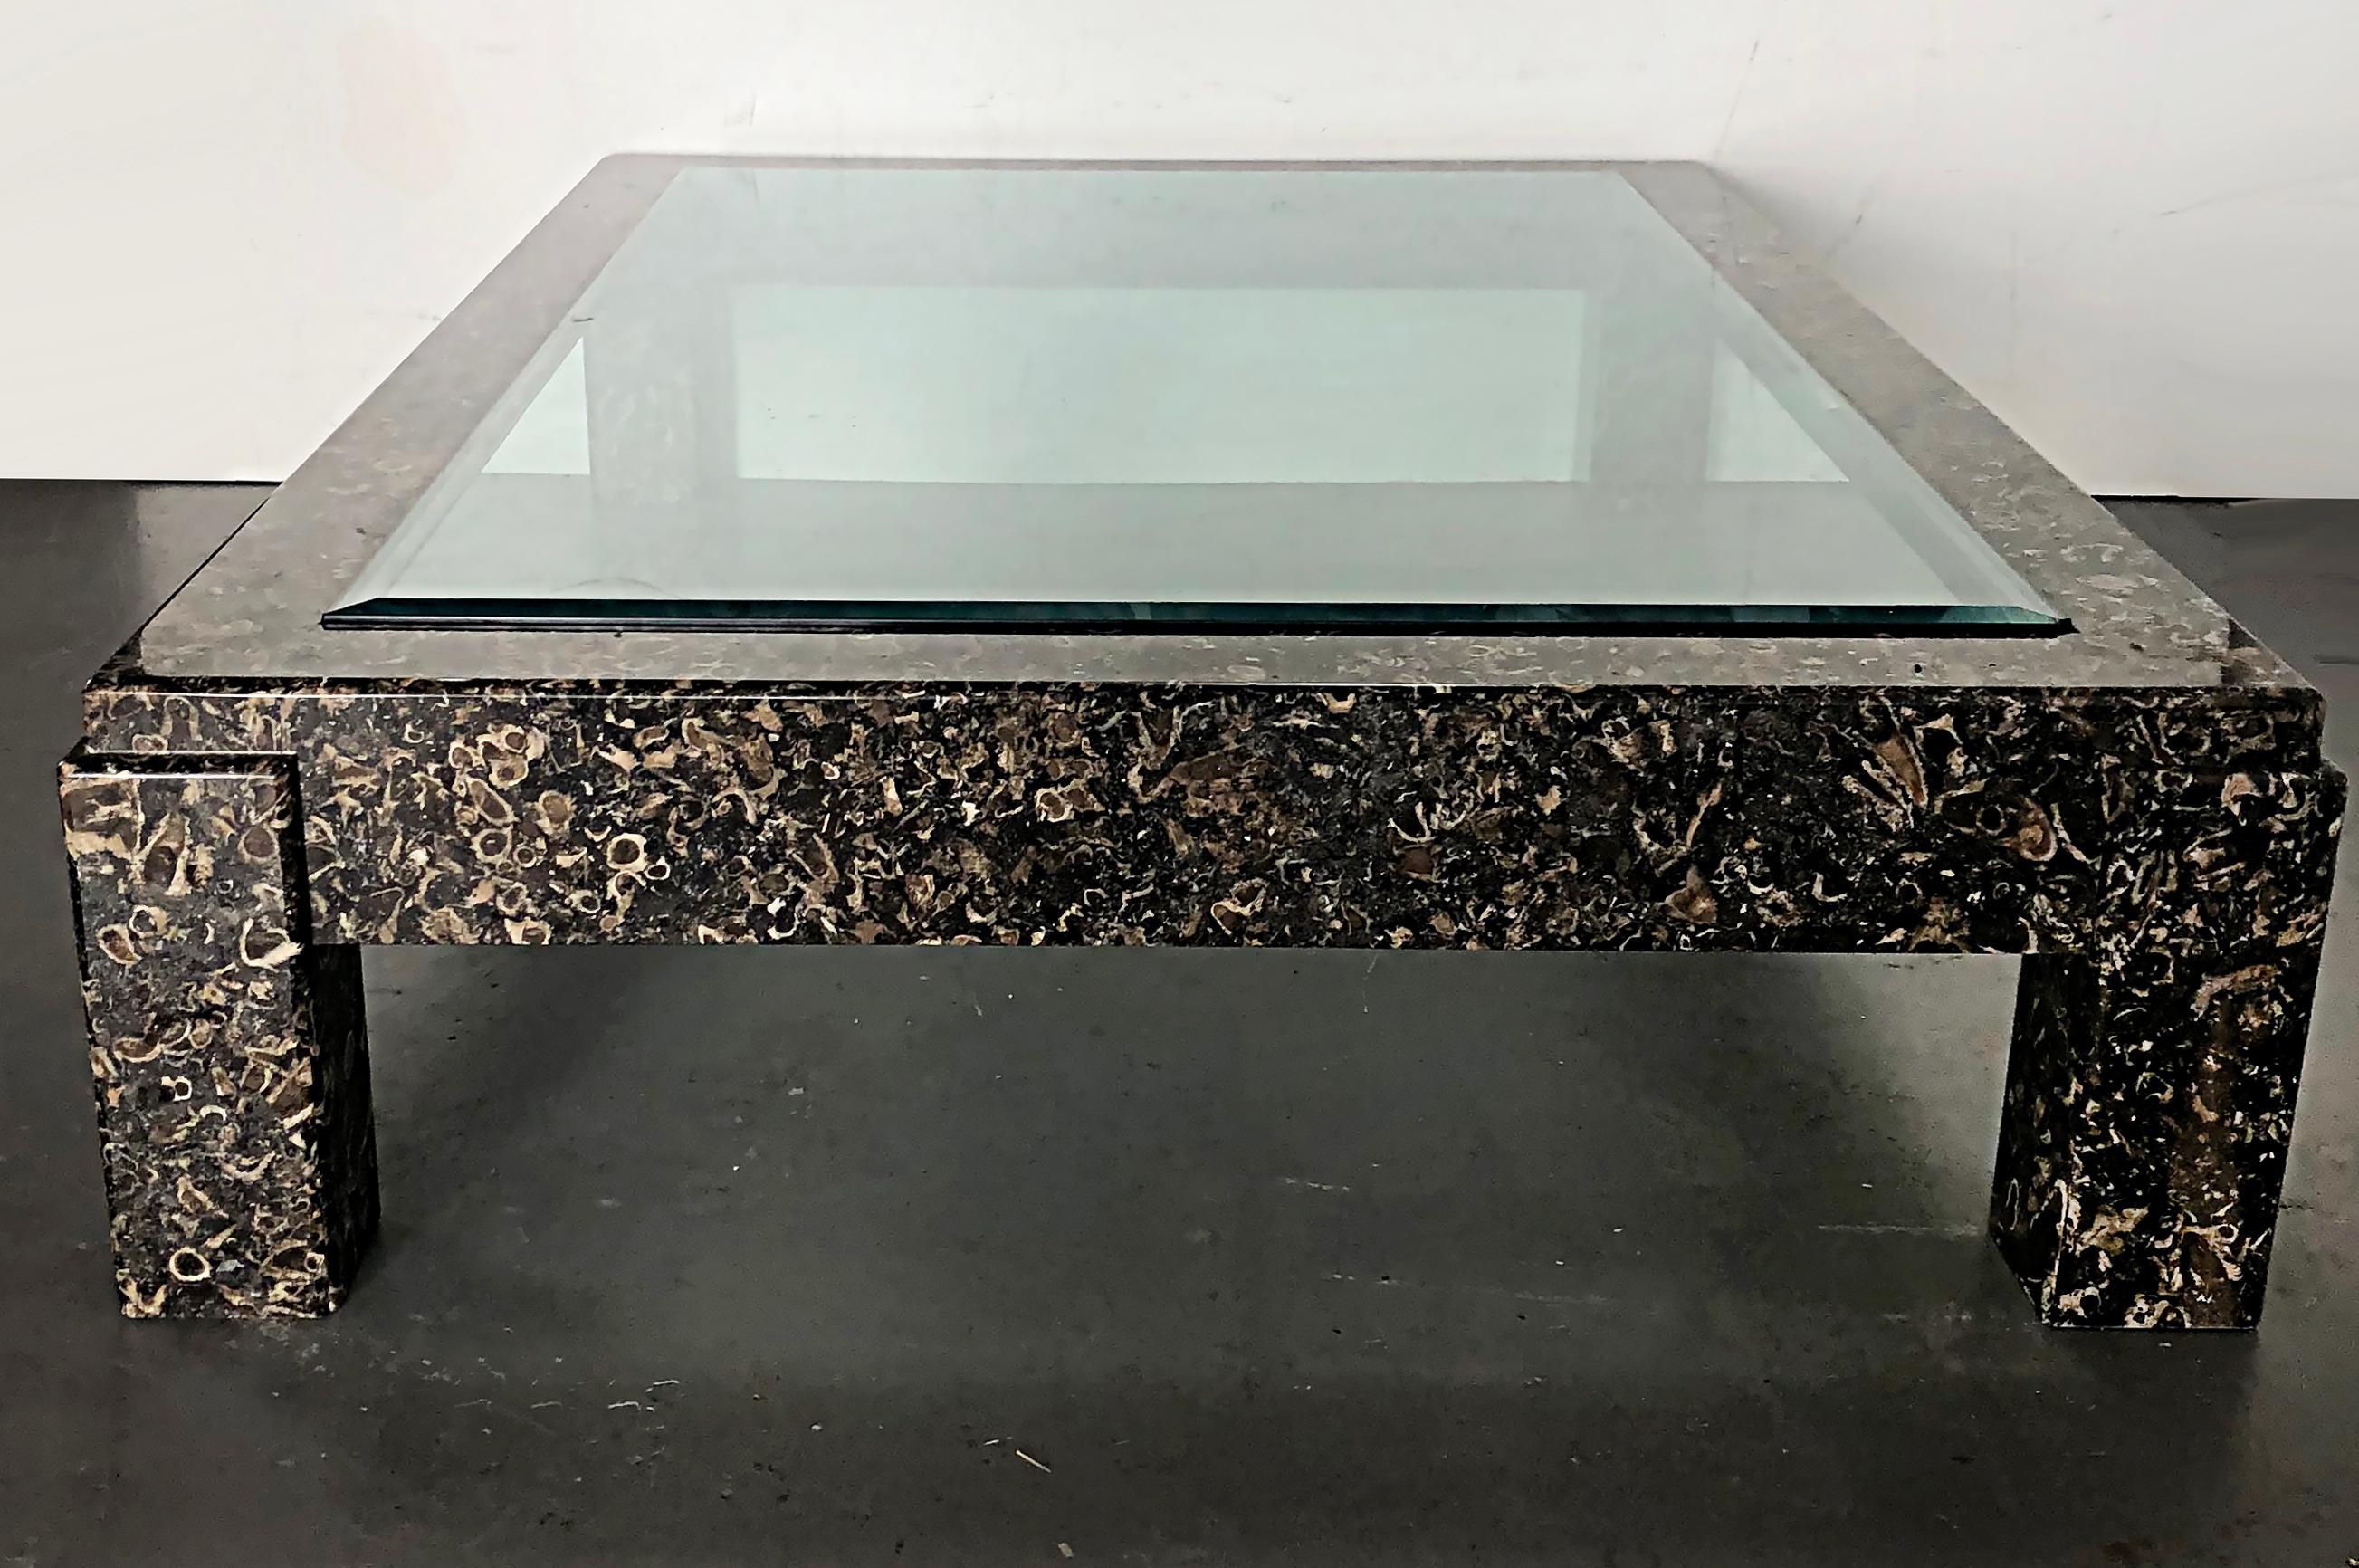 Overscale marble coffee table with inset glass top.

Offered for sale is an overscale marble coffee table with an inset glass top. This substantial table is a recent acquisition from a multi-million dollar Miami Beach La Gorce Island home. The